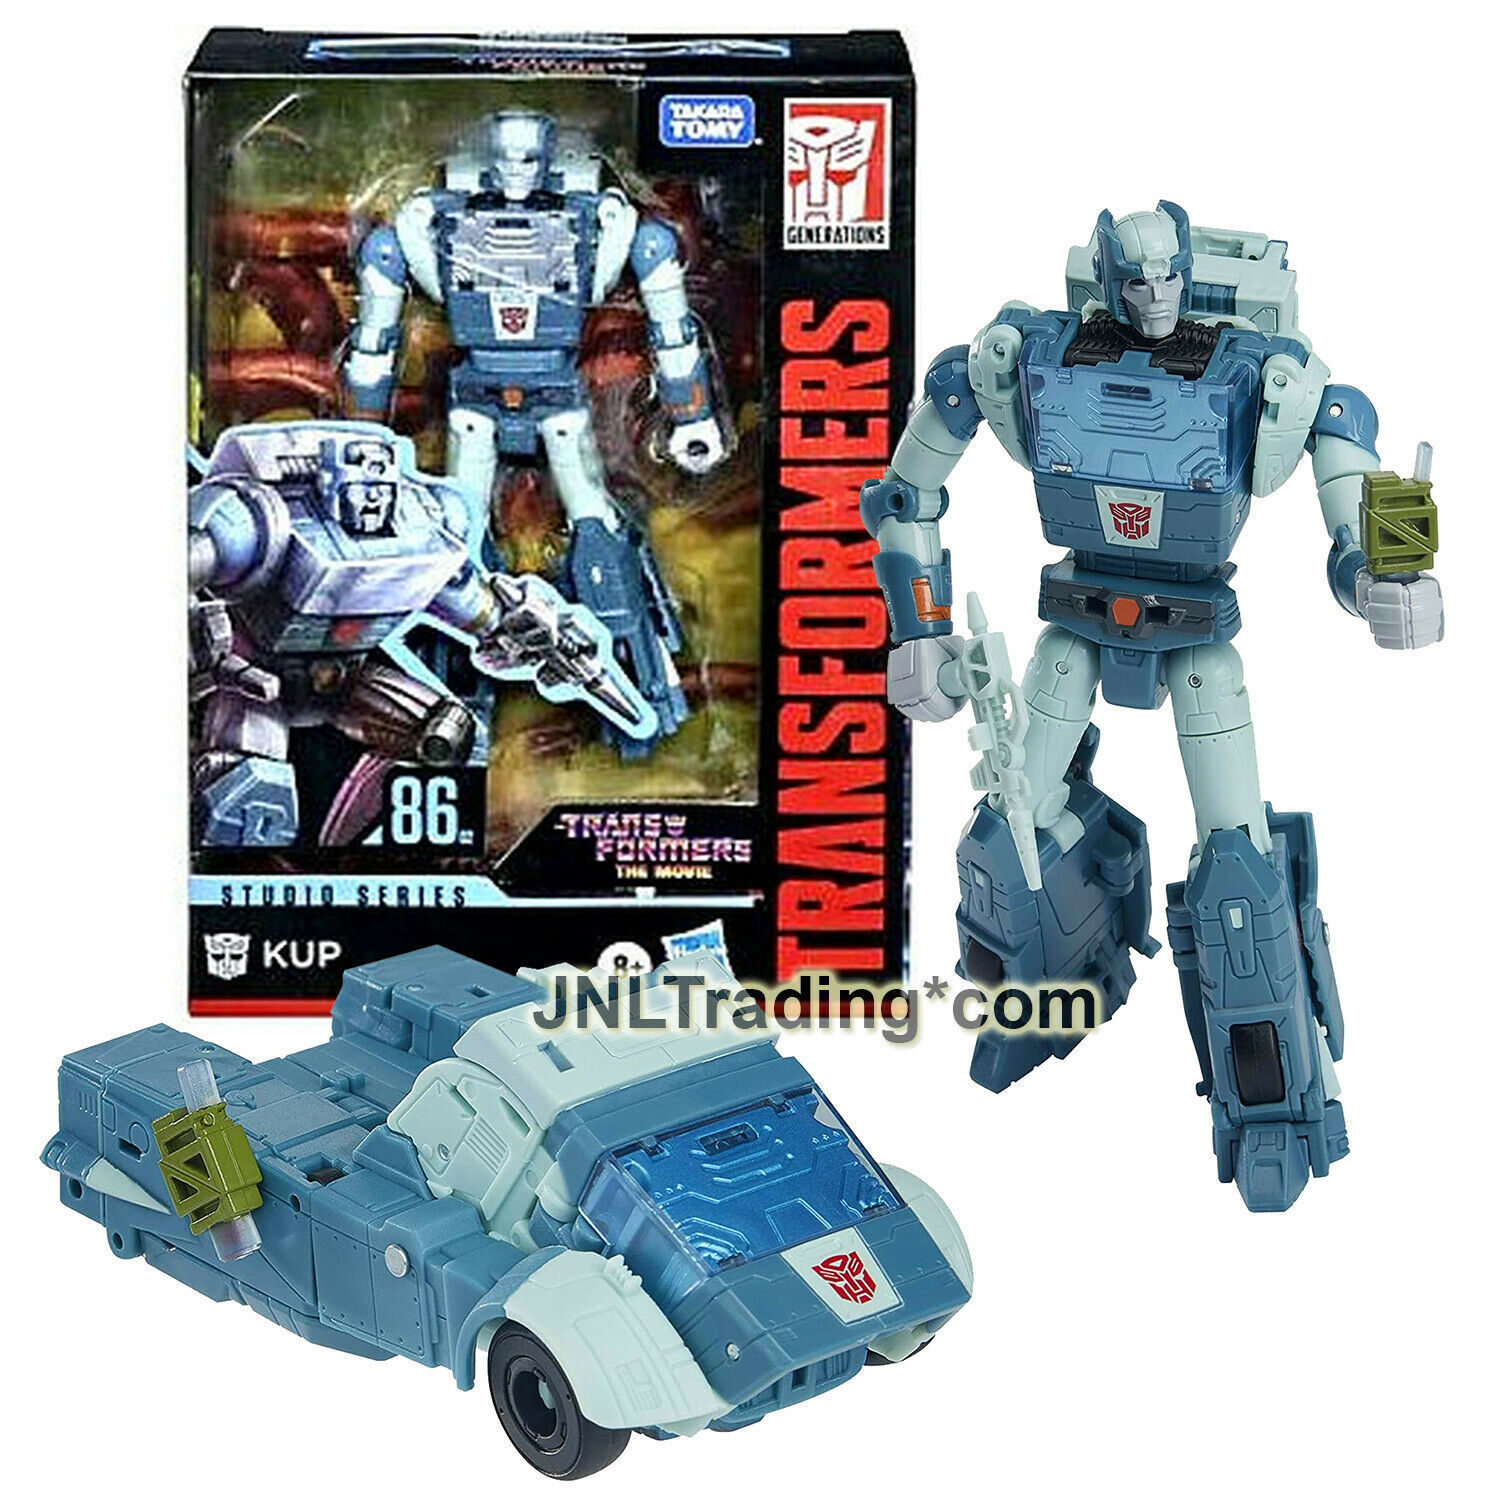 Primary image for Year 2020 Transformers Movie Generations Studio Deluxe Class Figure Autobot KUP